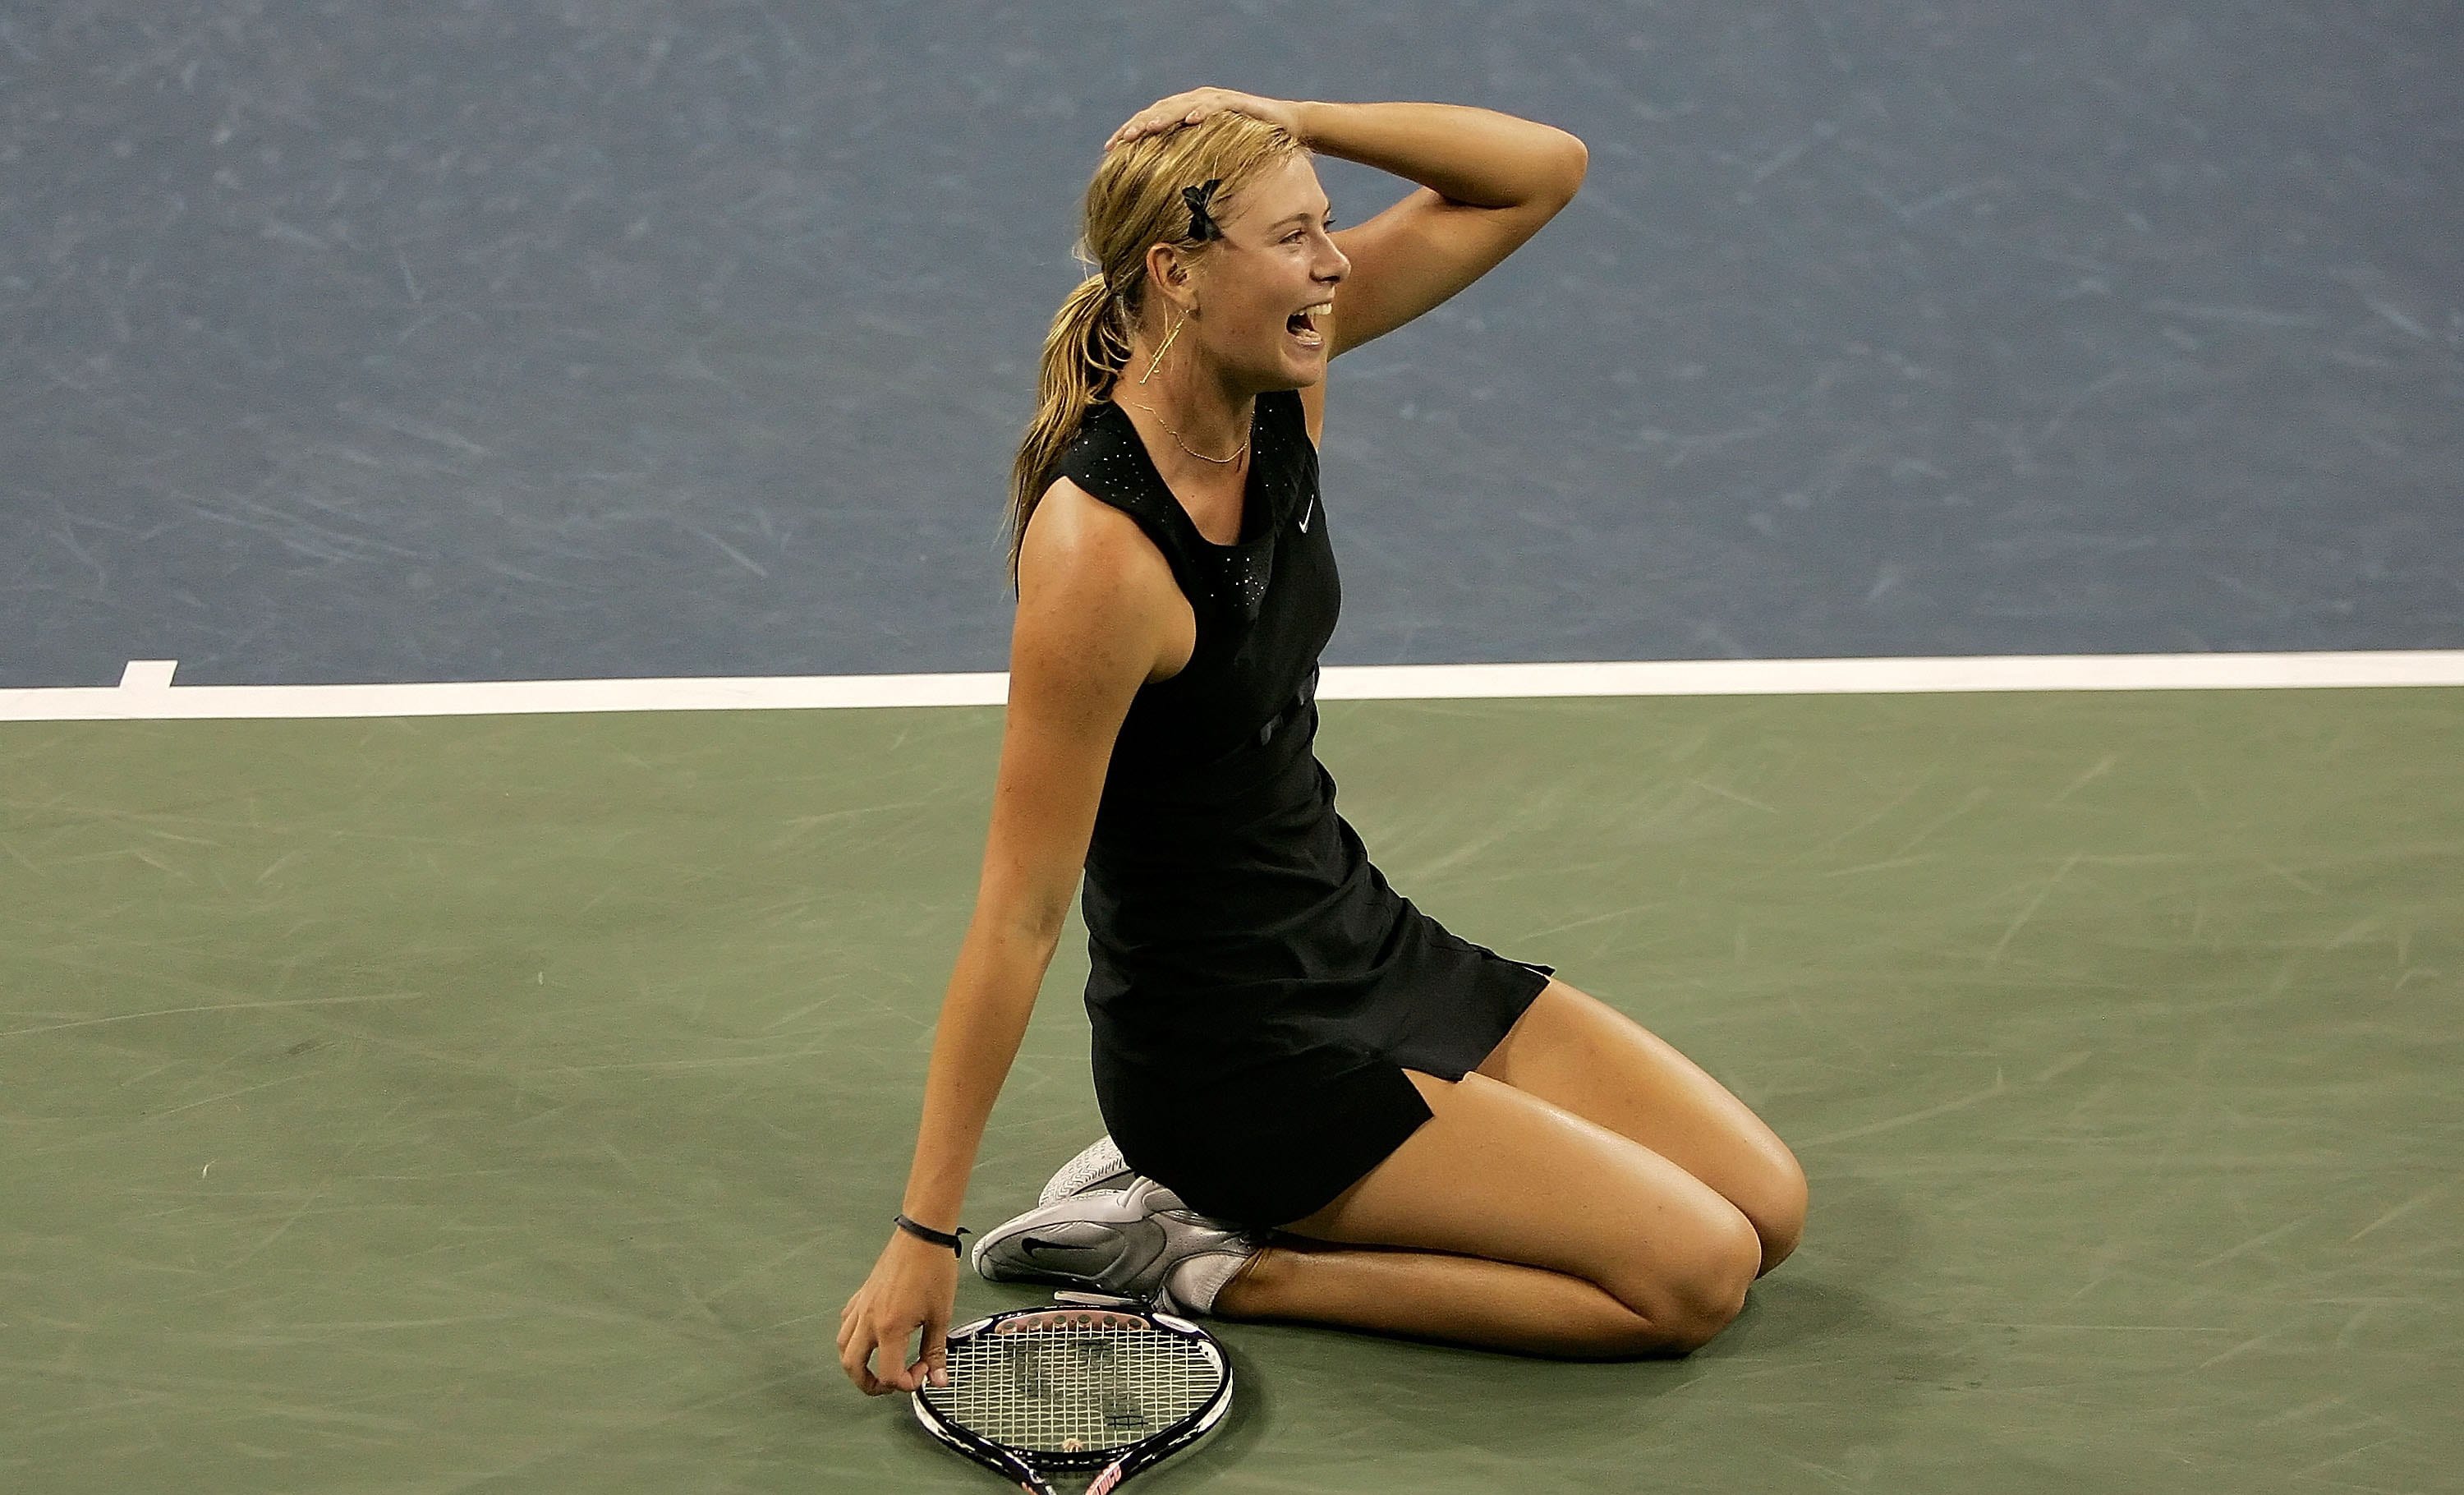 What Is Maria Sharapova’s Net Worth? Know About Her Personal & Professional Life!